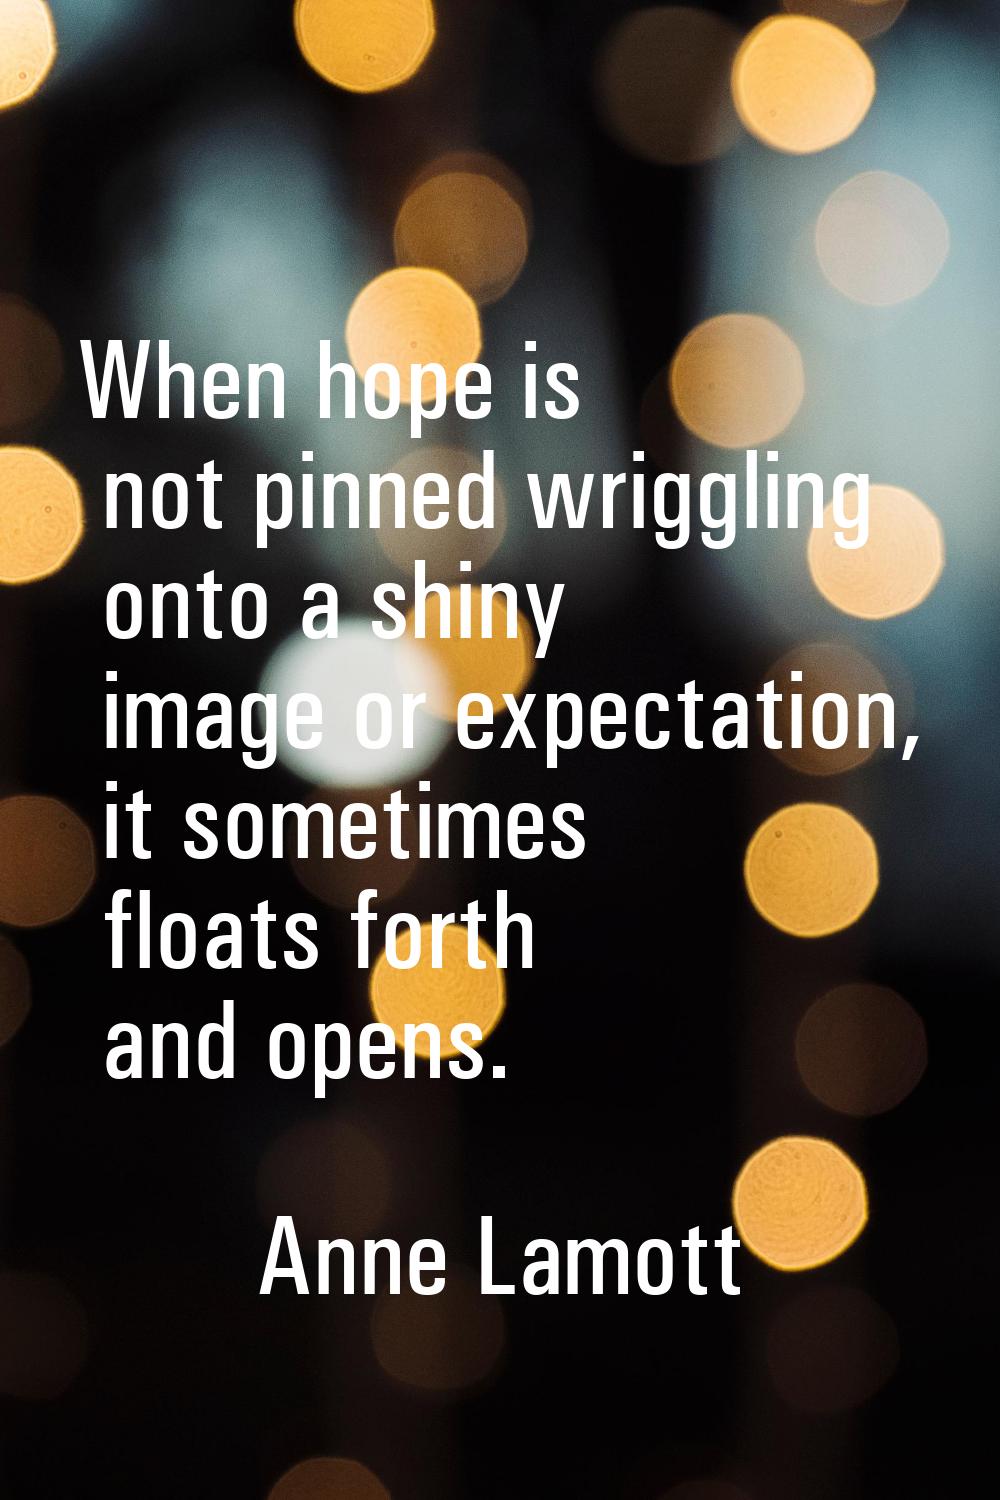 When hope is not pinned wriggling onto a shiny image or expectation, it sometimes floats forth and 